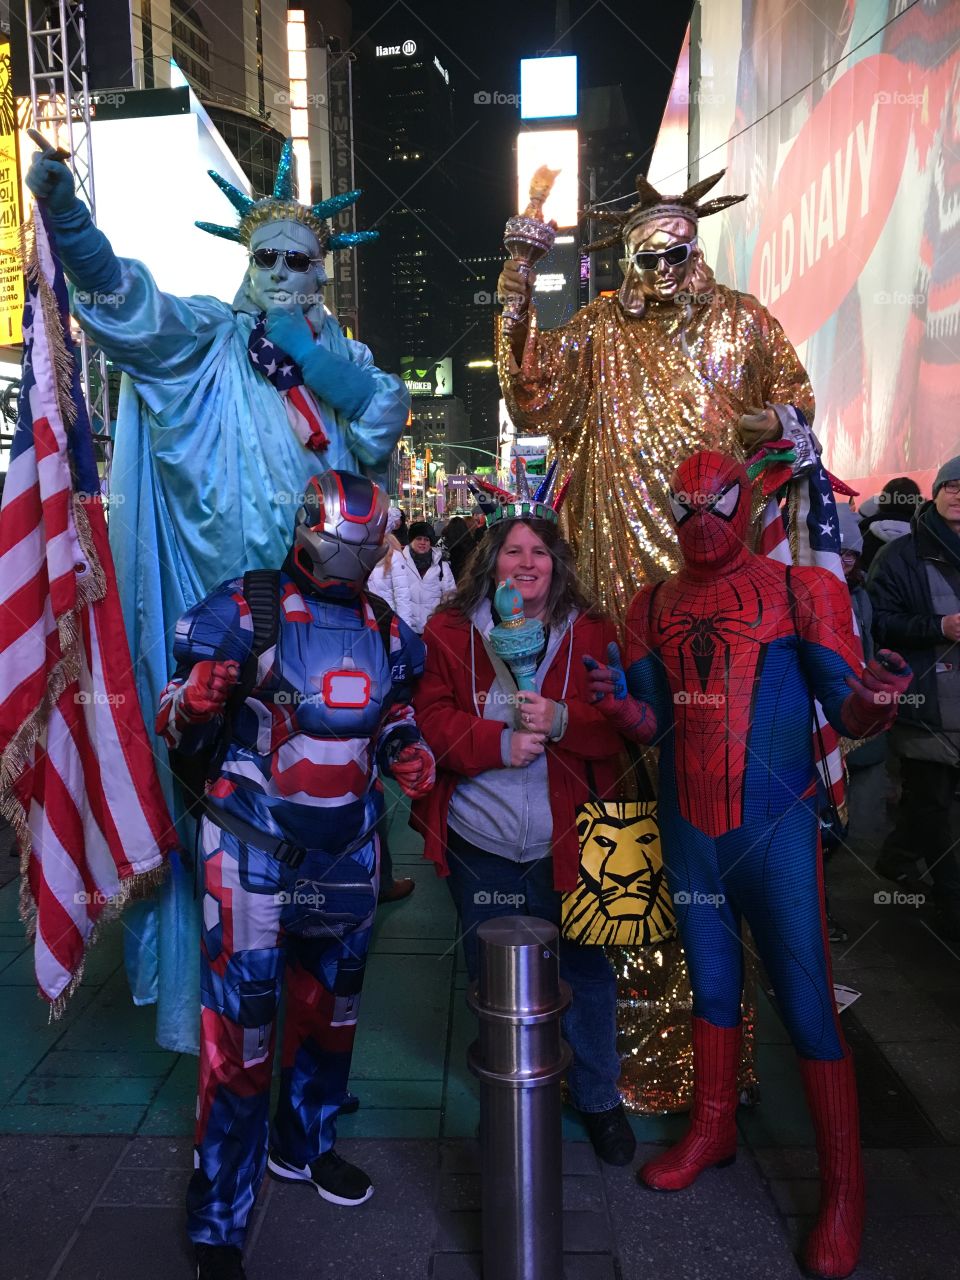 Crazy fun time, Statue of Liberty, Spider-Man and superheroes in Times Square NYC at Christmas 